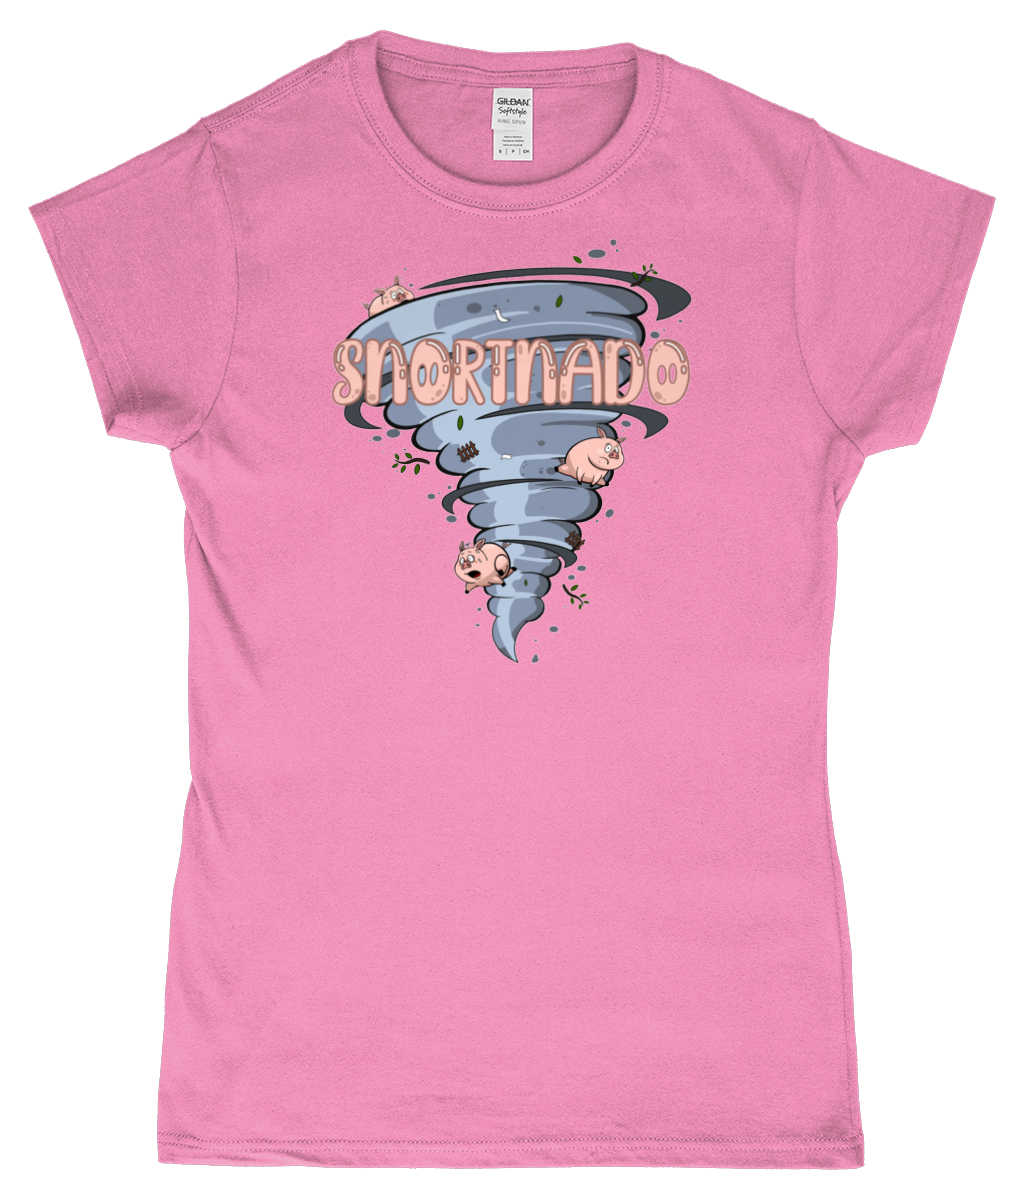 ESP4HIM 'Snortnado' SoftStyle Ladies Fitted T-Shirt